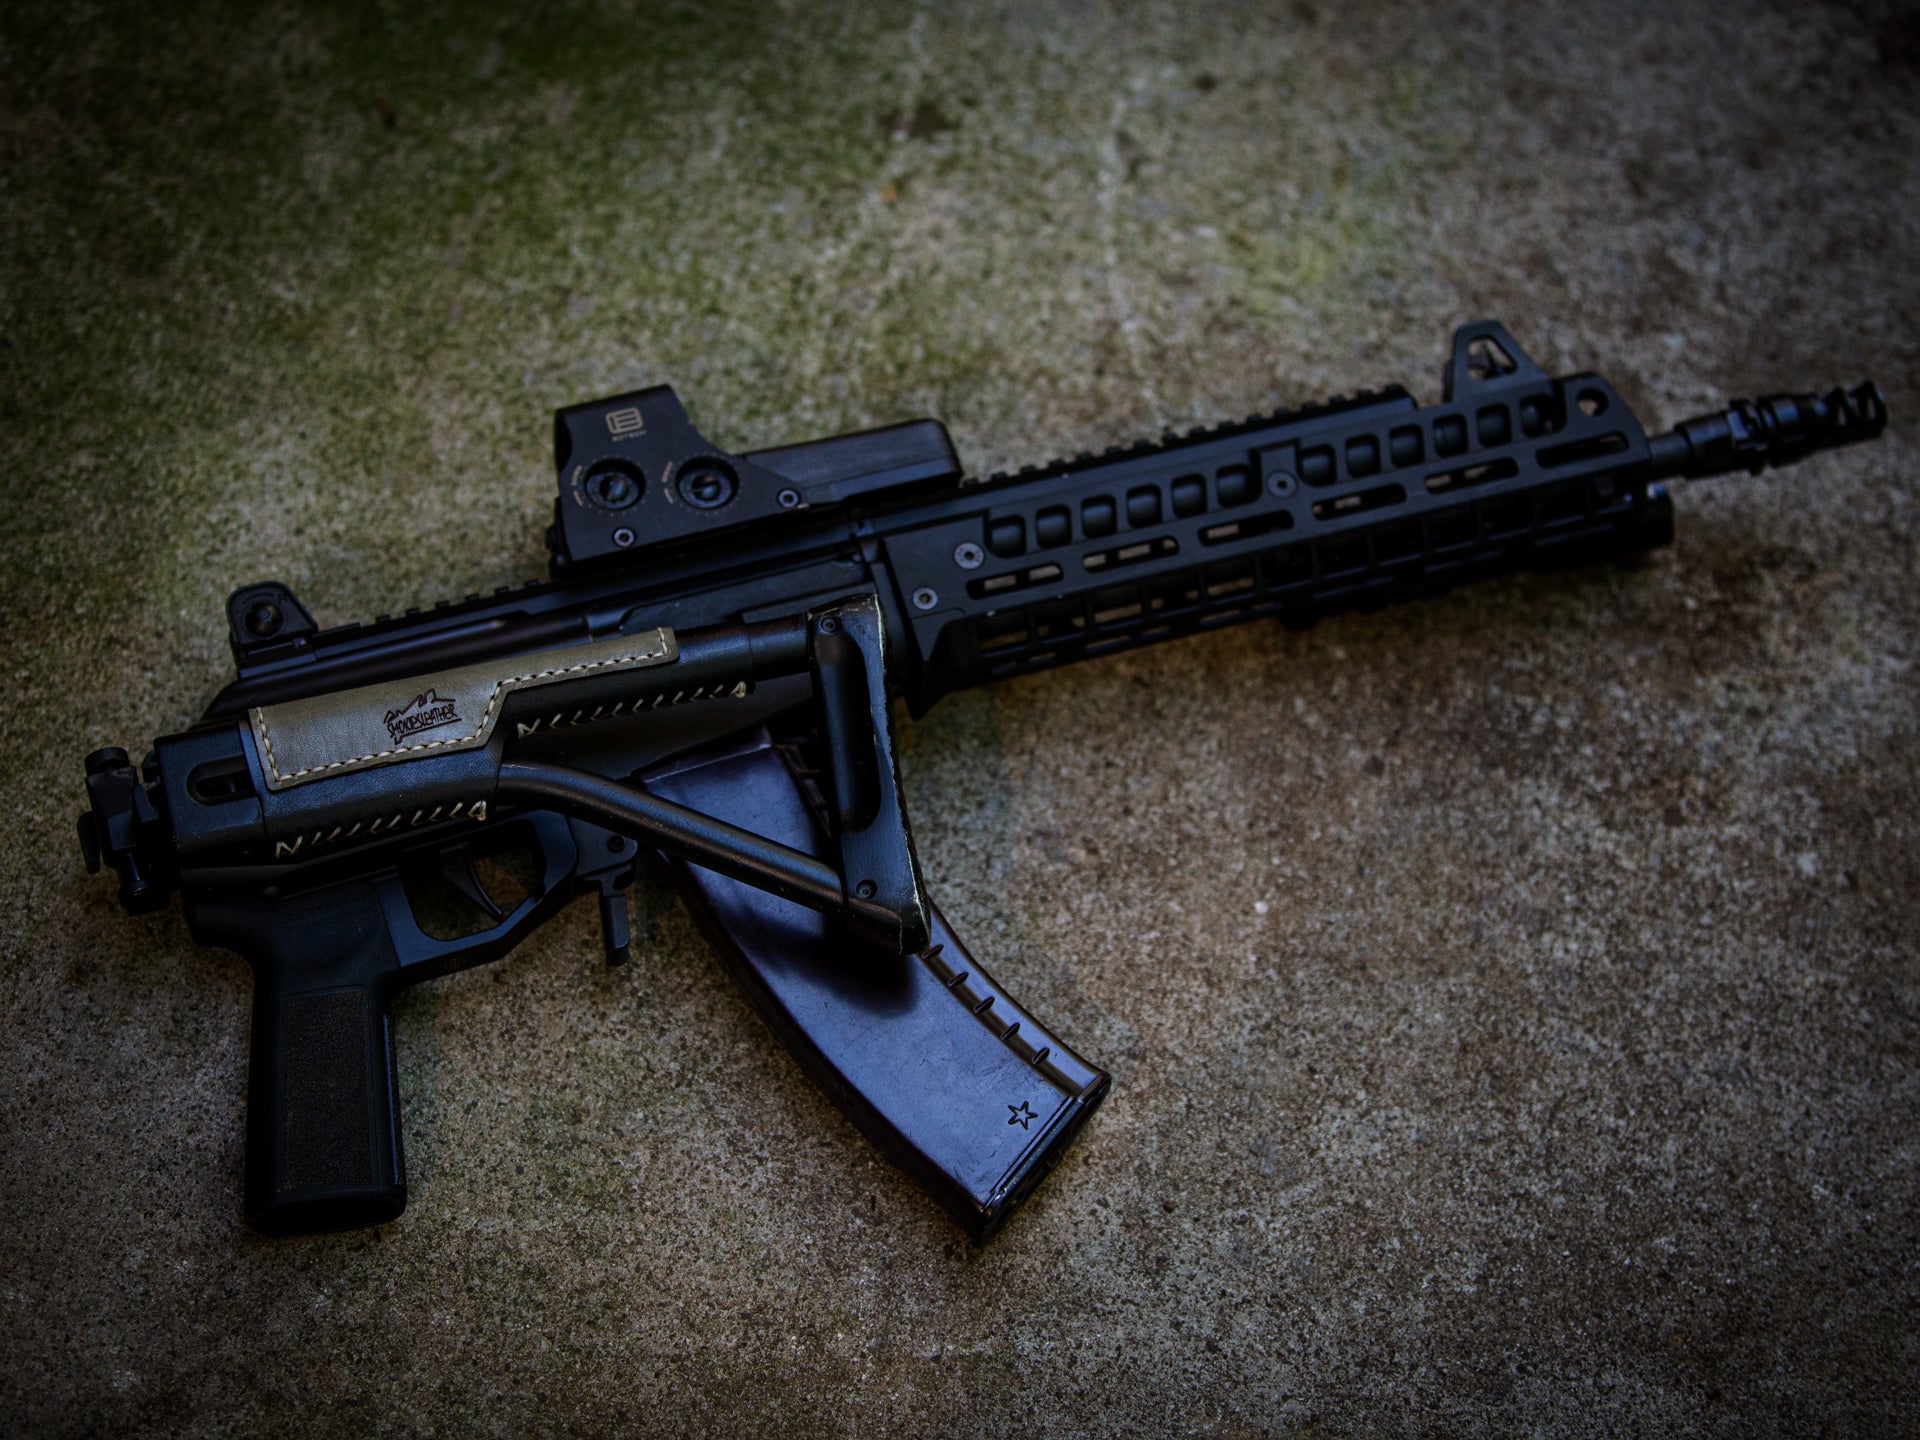 Galil Gen 1 Ace with Eotech optic, RS Regulate handguard, KNS delete kit, and stock pad.